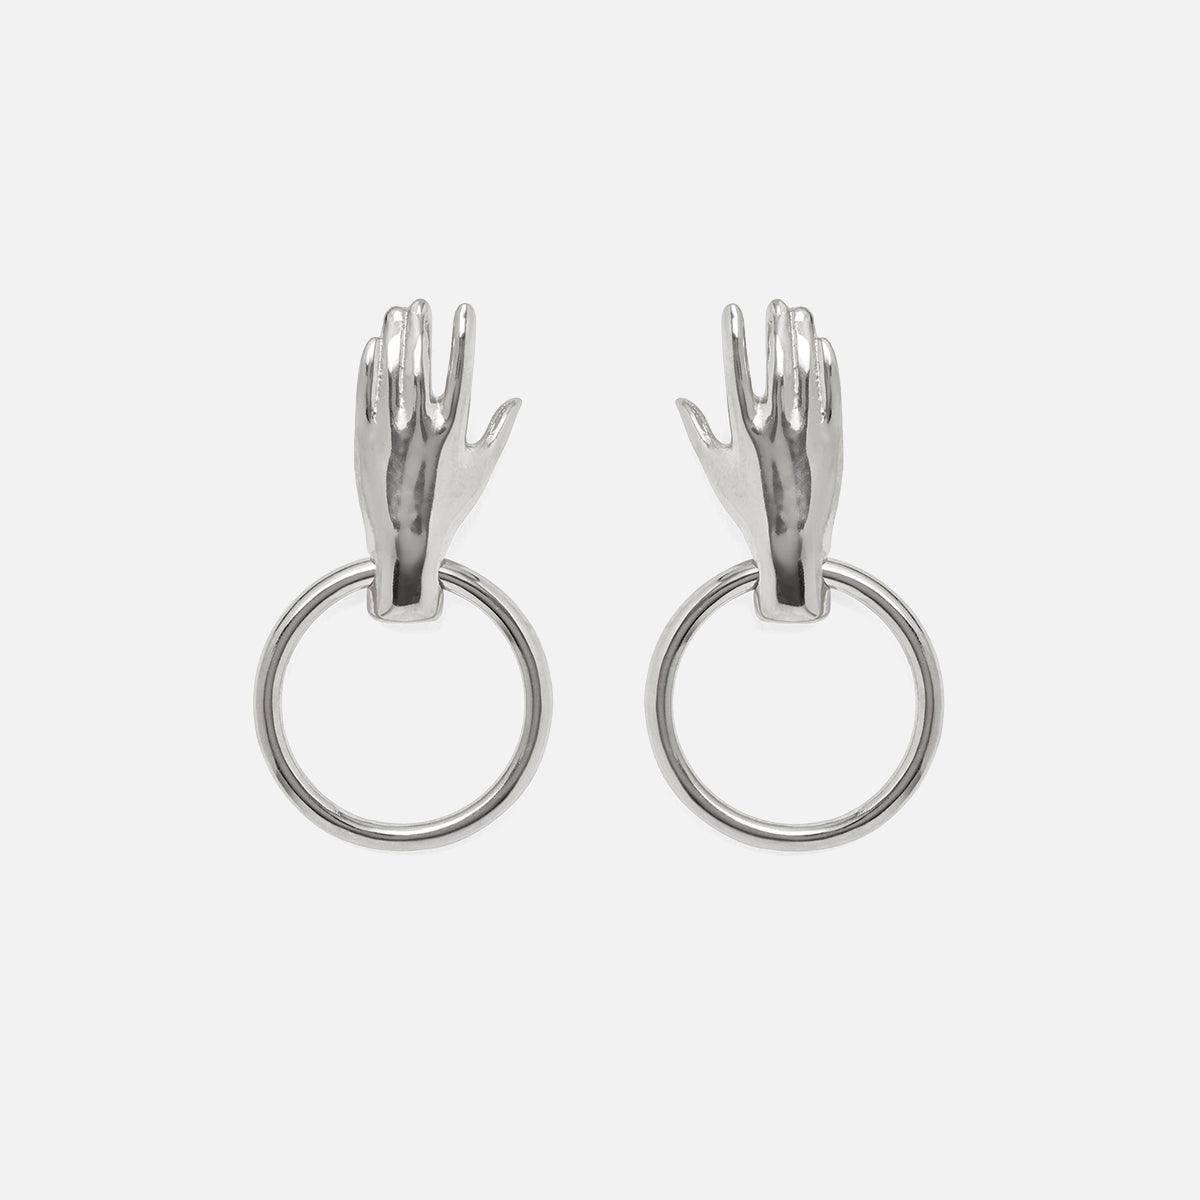 Hand Hoop Earring in Silver - At Present